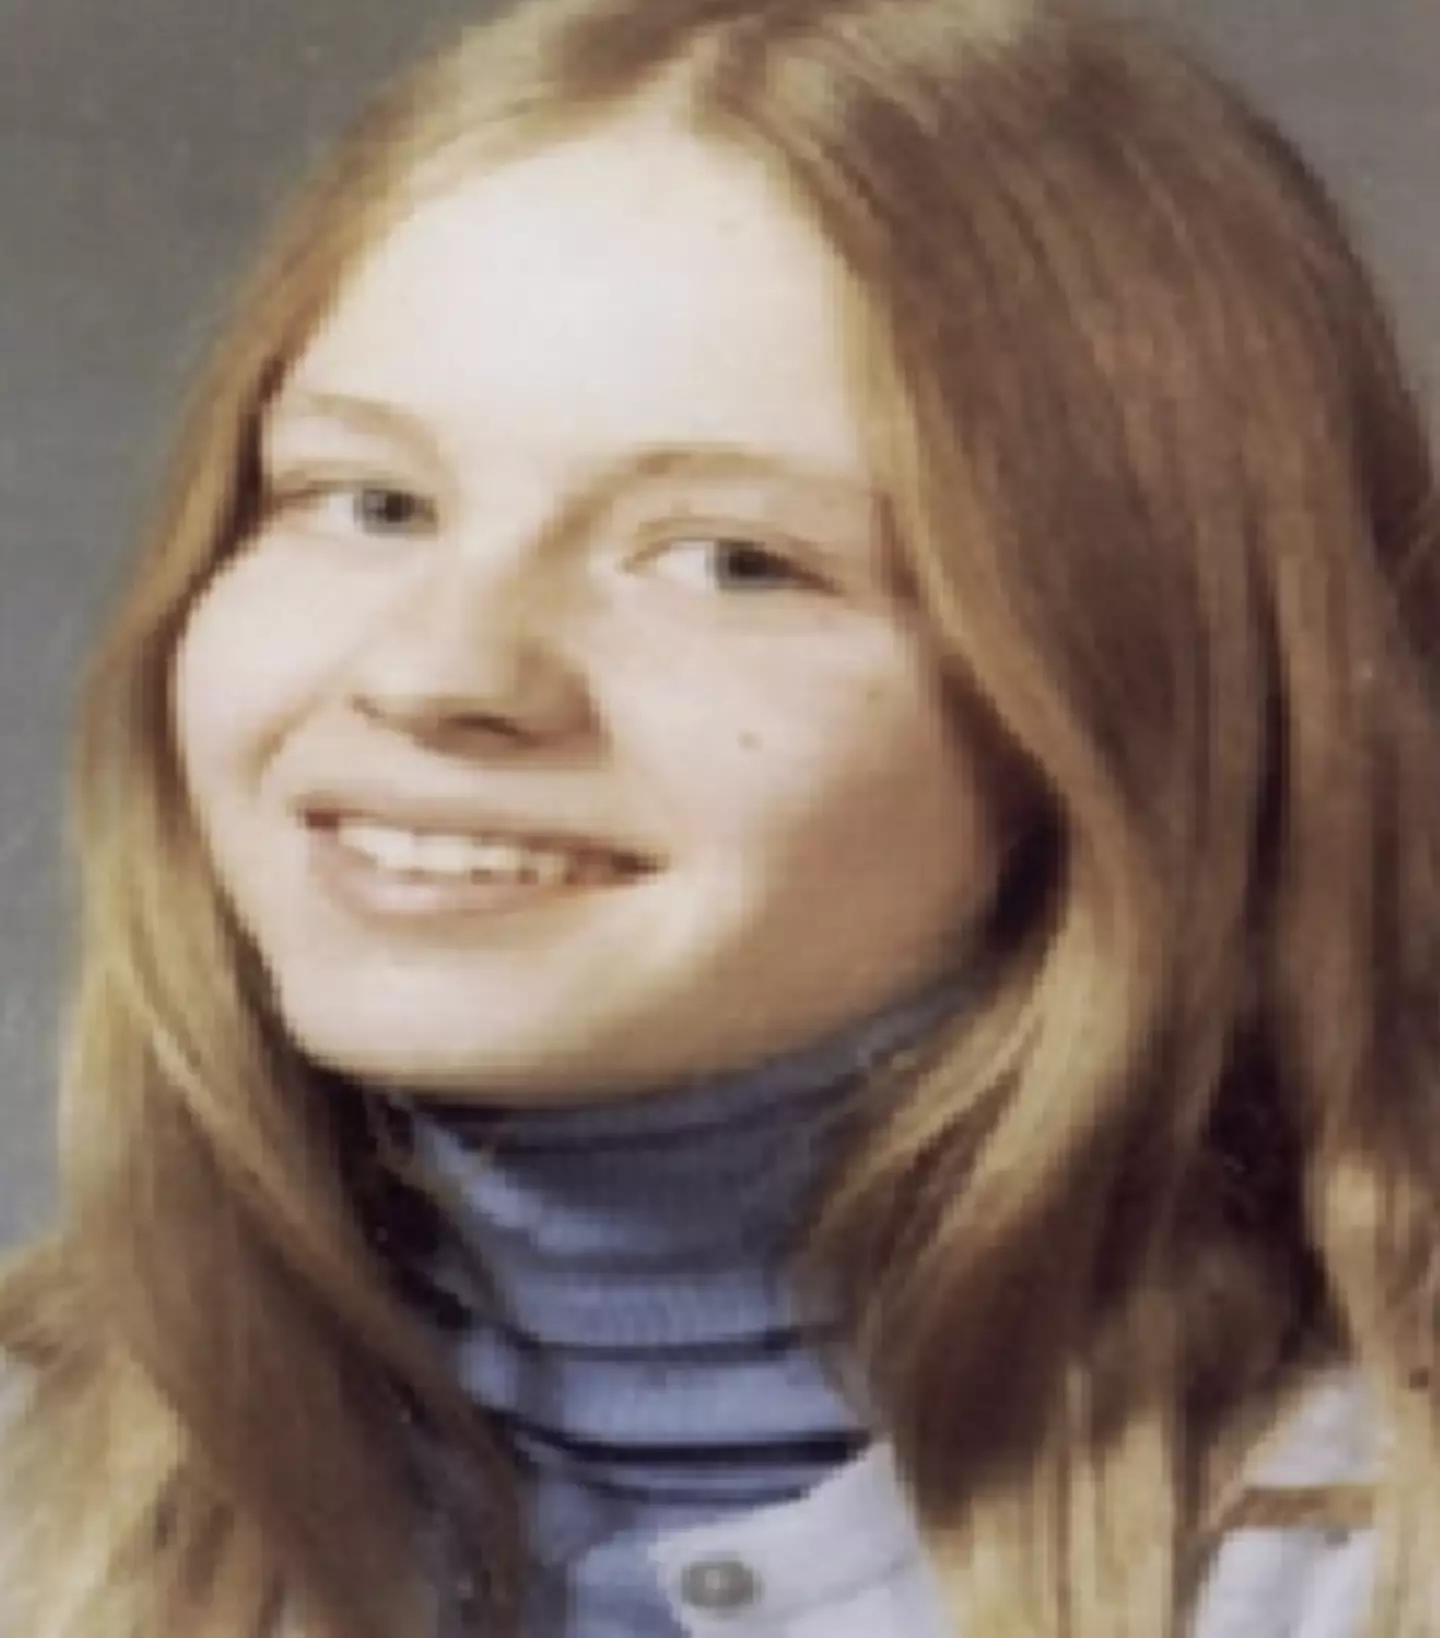 Sharron Prior was just 16 when she was murdered back in 1975.